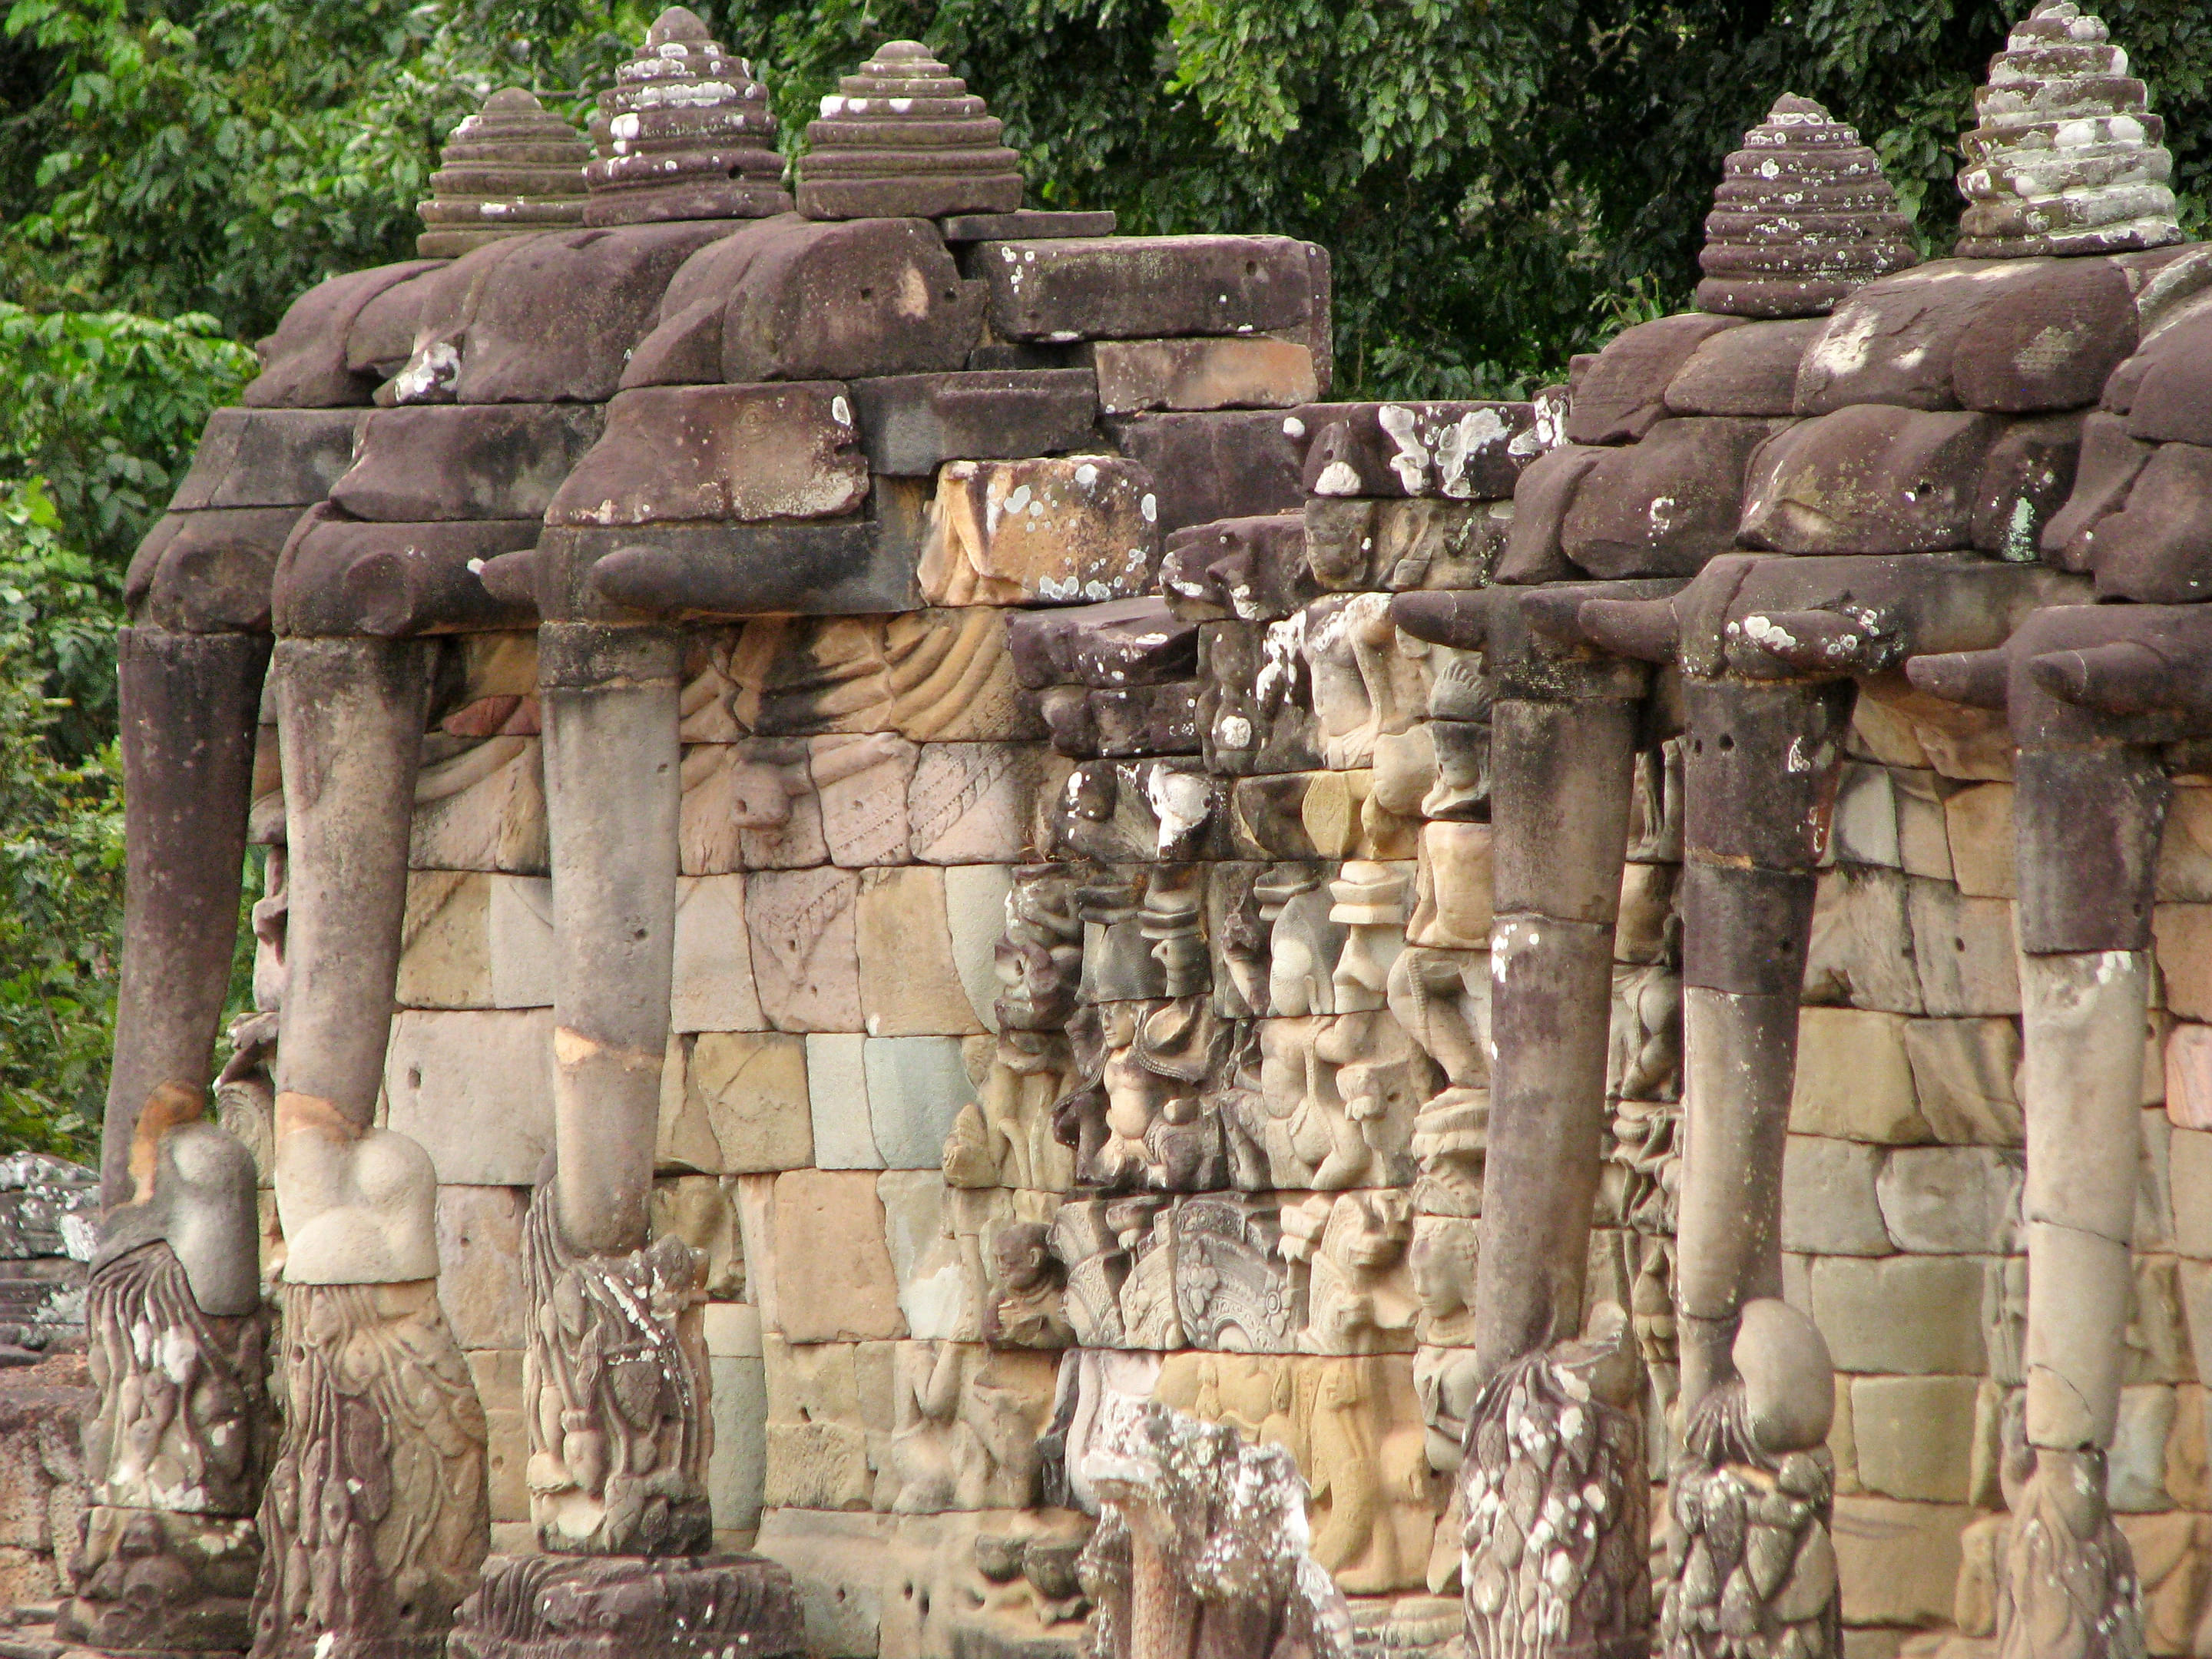 The Terrace Of The Elephants Overview